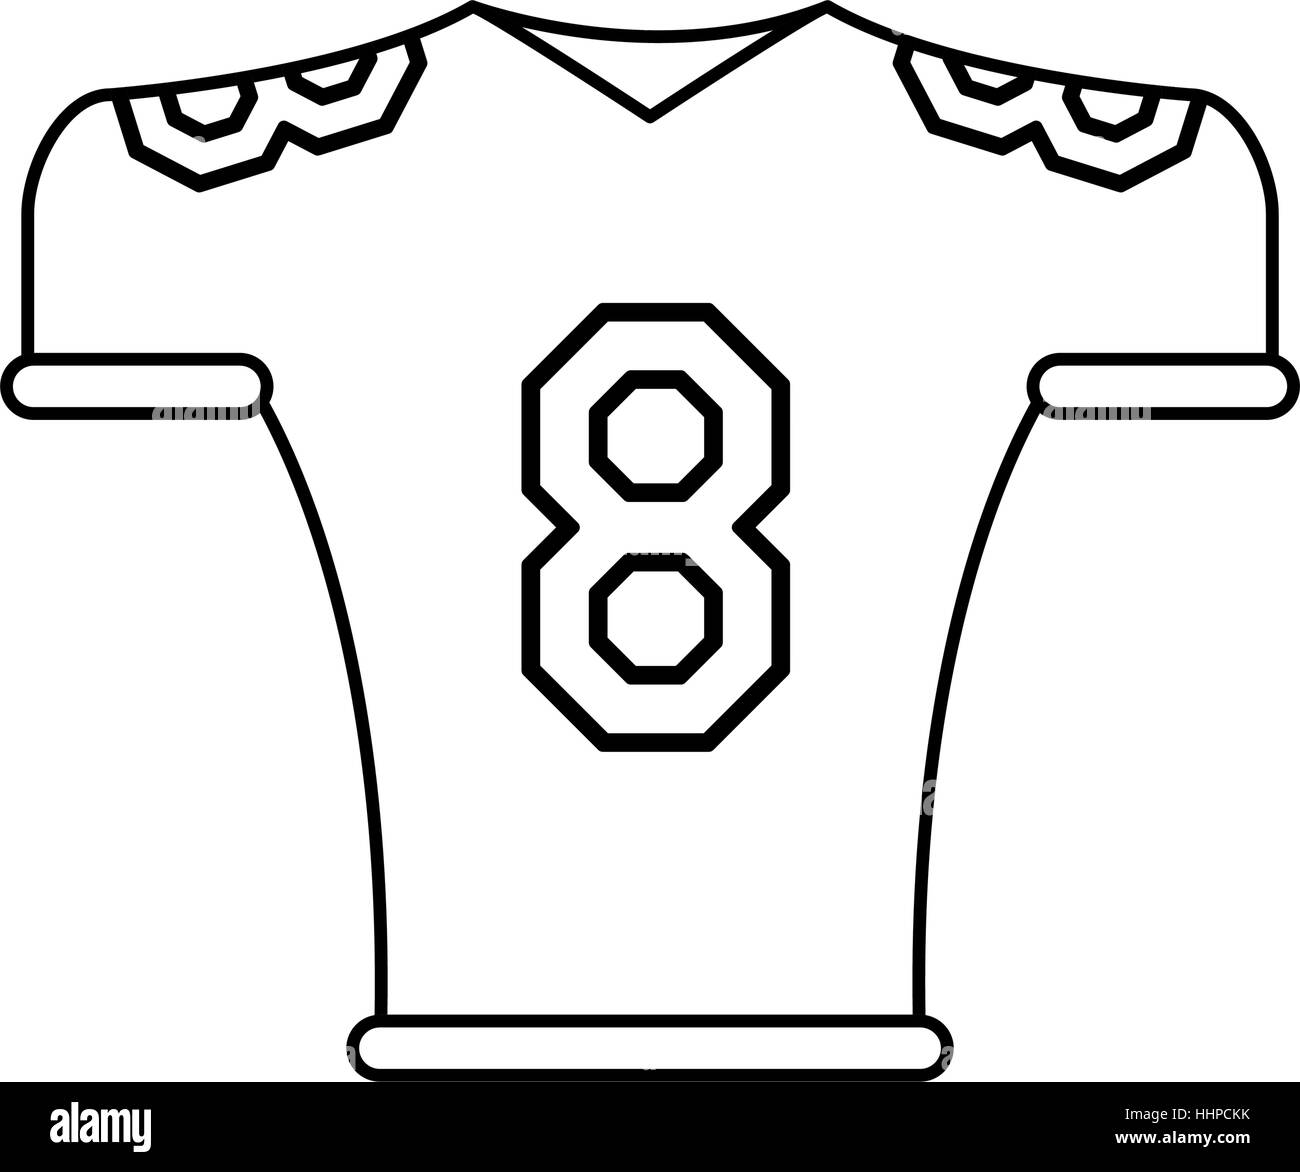 11,657 Football Jersey Black White Images, Stock Photos, 3D